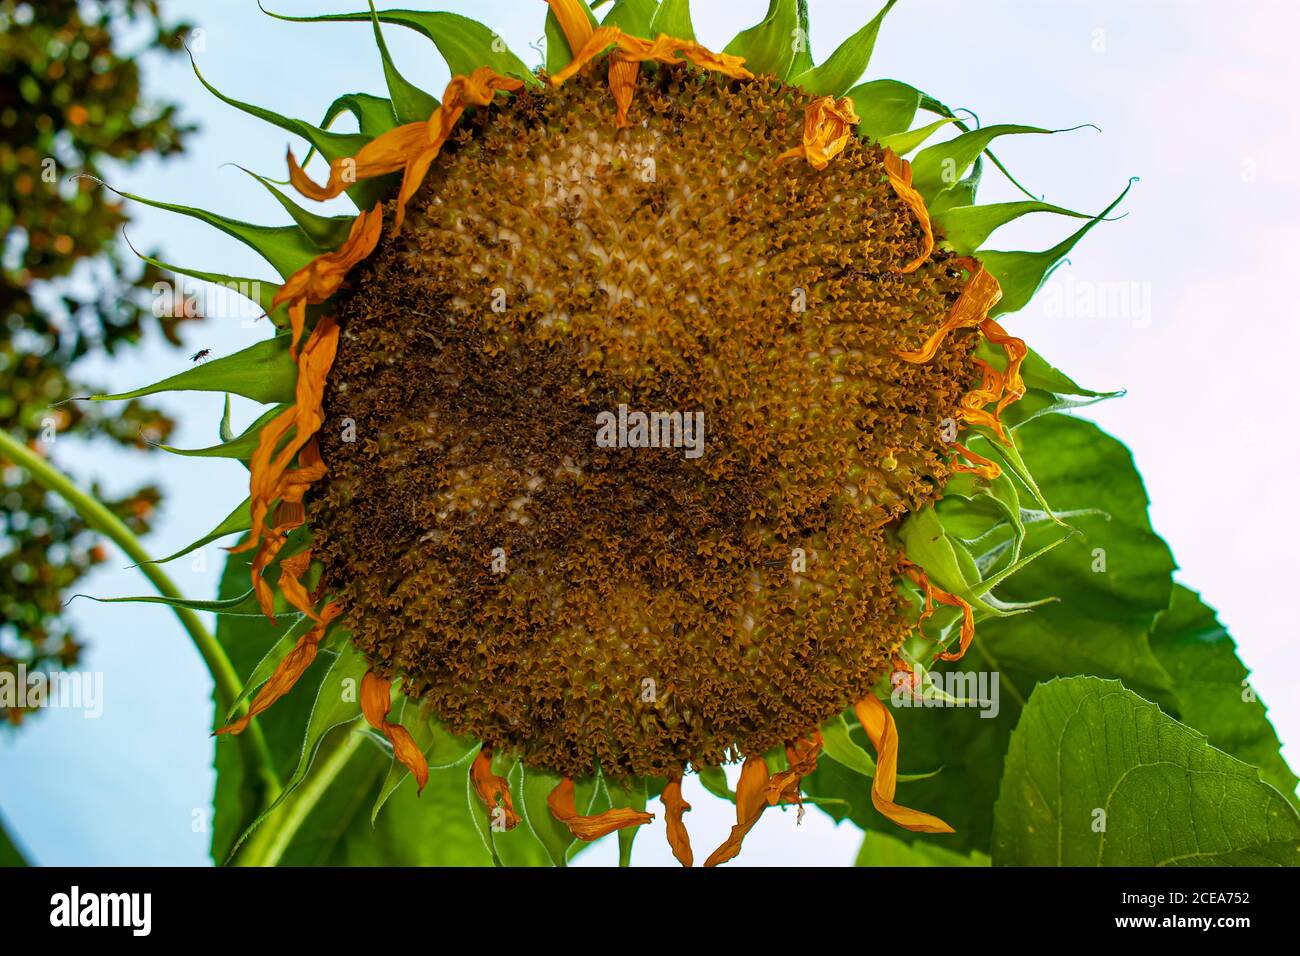 A close up image of a grown up sunflower which is facing down to the ...